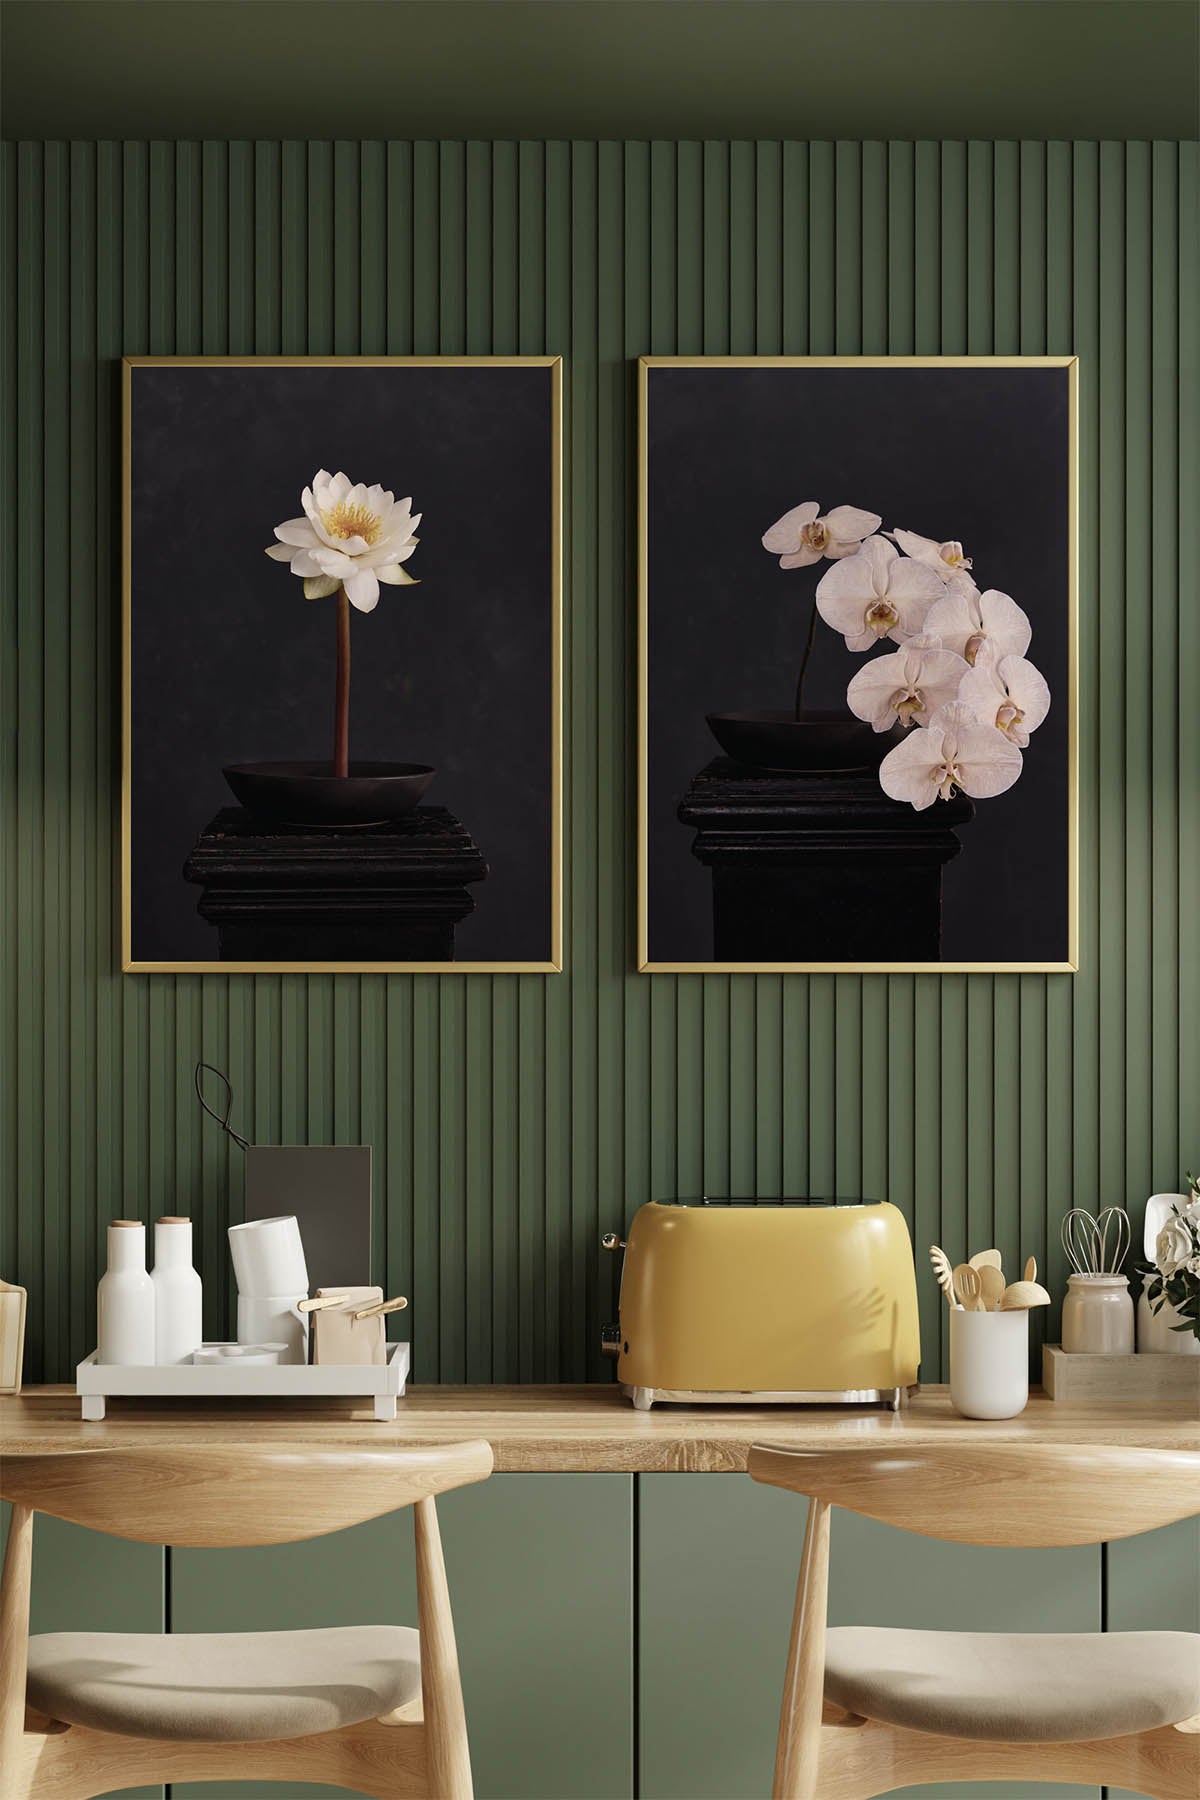 Fine Art Print Of A White Phaleanopsis Stem In A Black Bowl On A Black Mantle With A Black Rustic Background In A Olive Coloured Kitchen With Danish Sttools